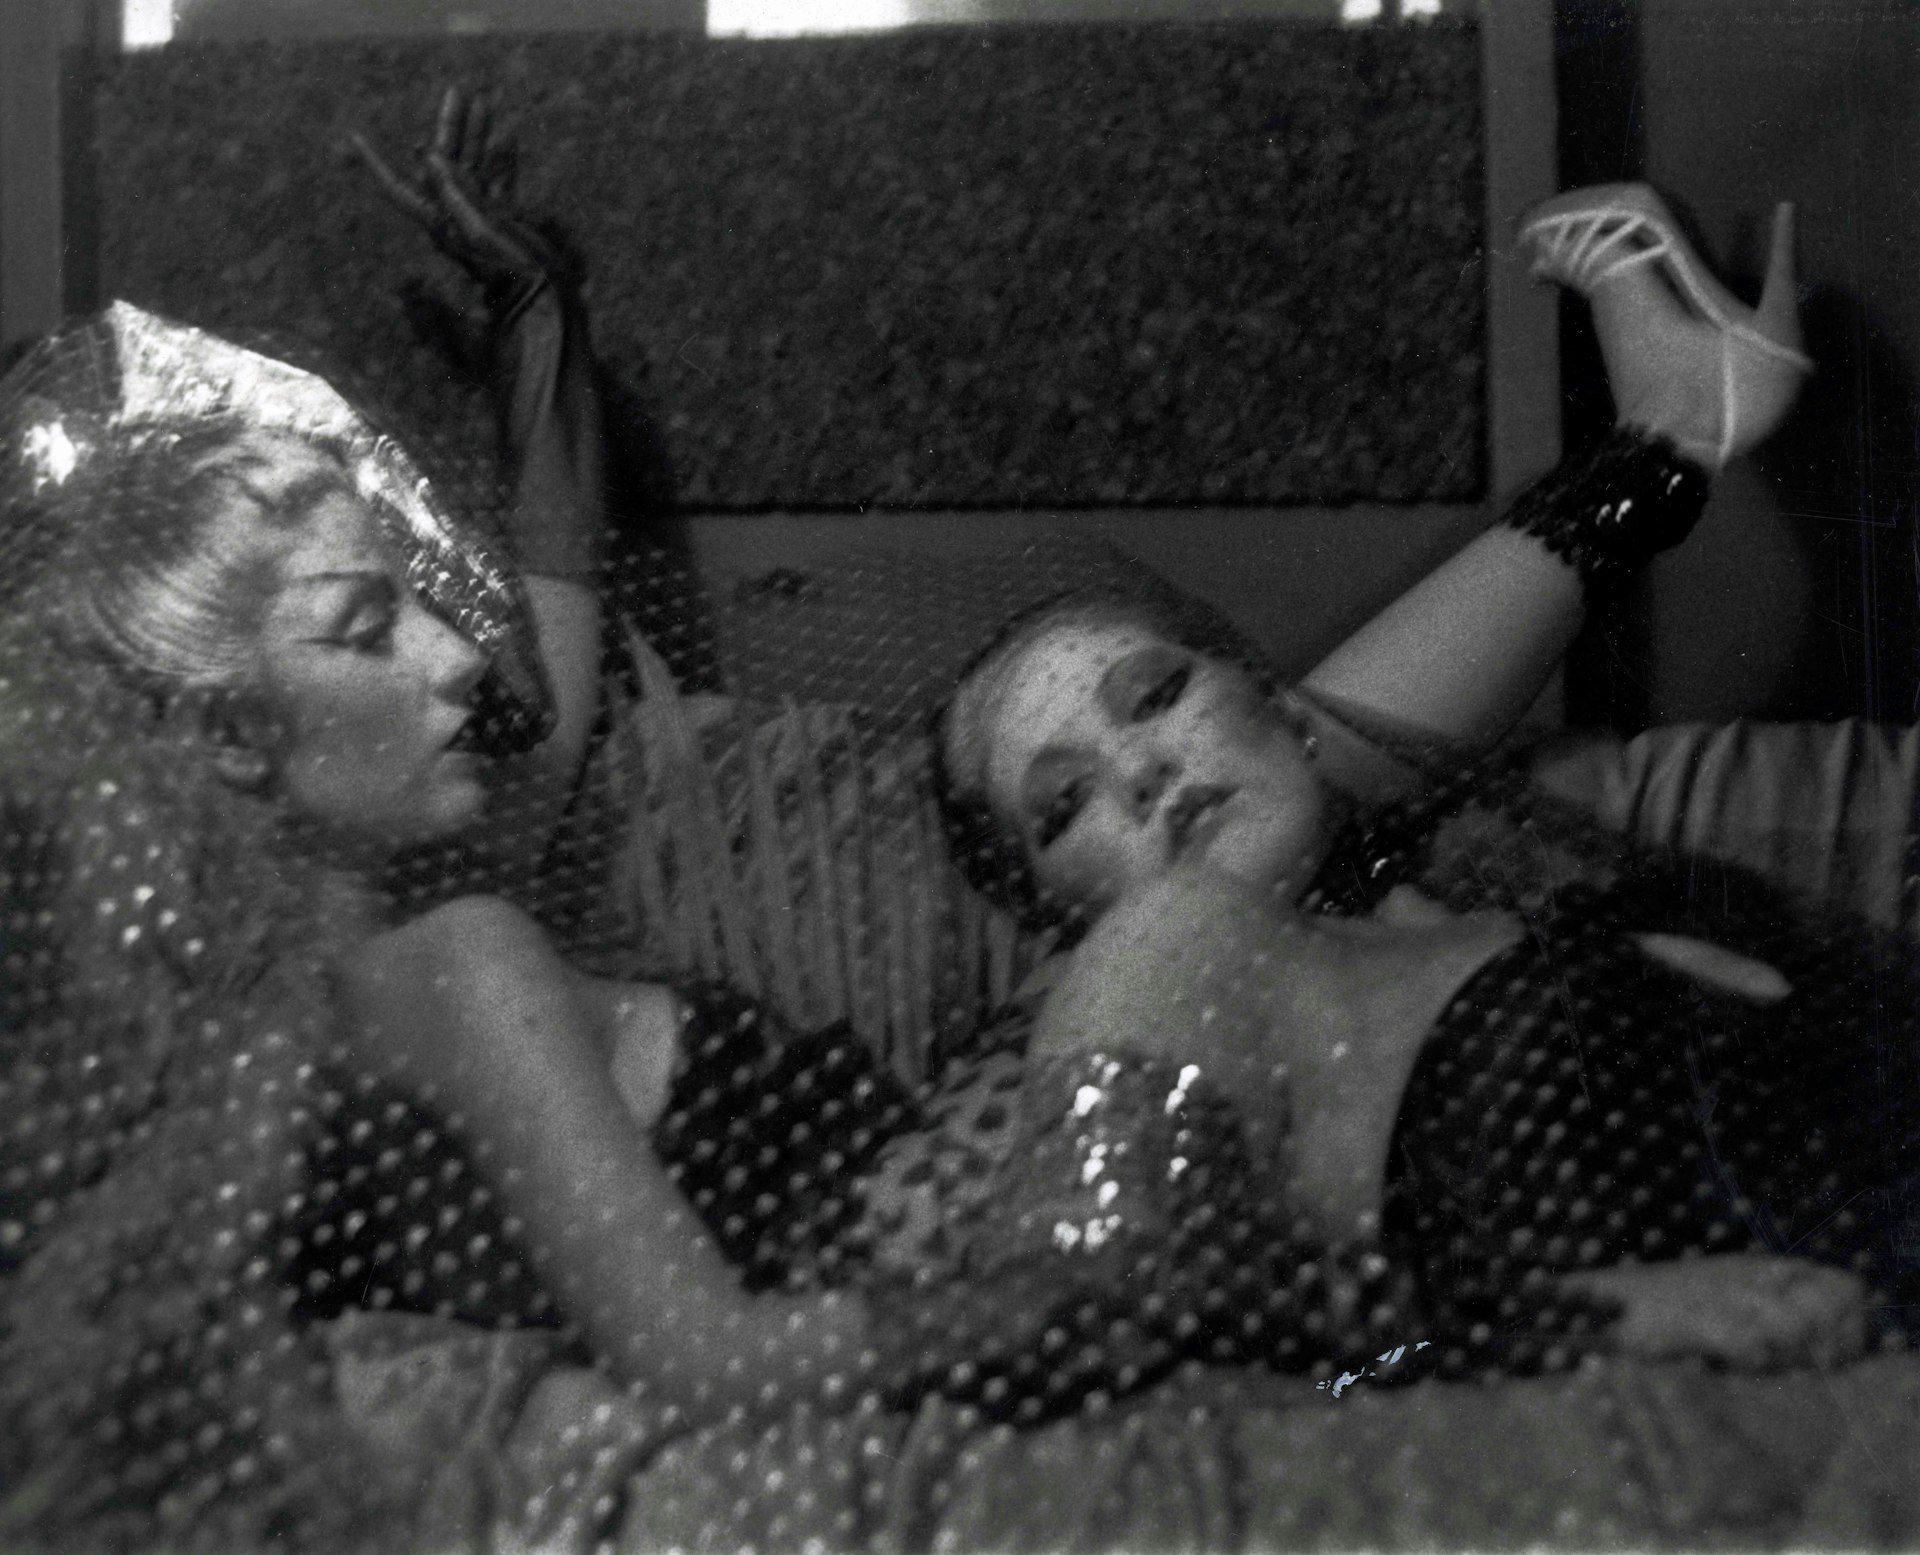 Patssi Valdez, Reclining (Betty Salas and Gloria), c. early 1980s. Courtesy of Patssi Valdez